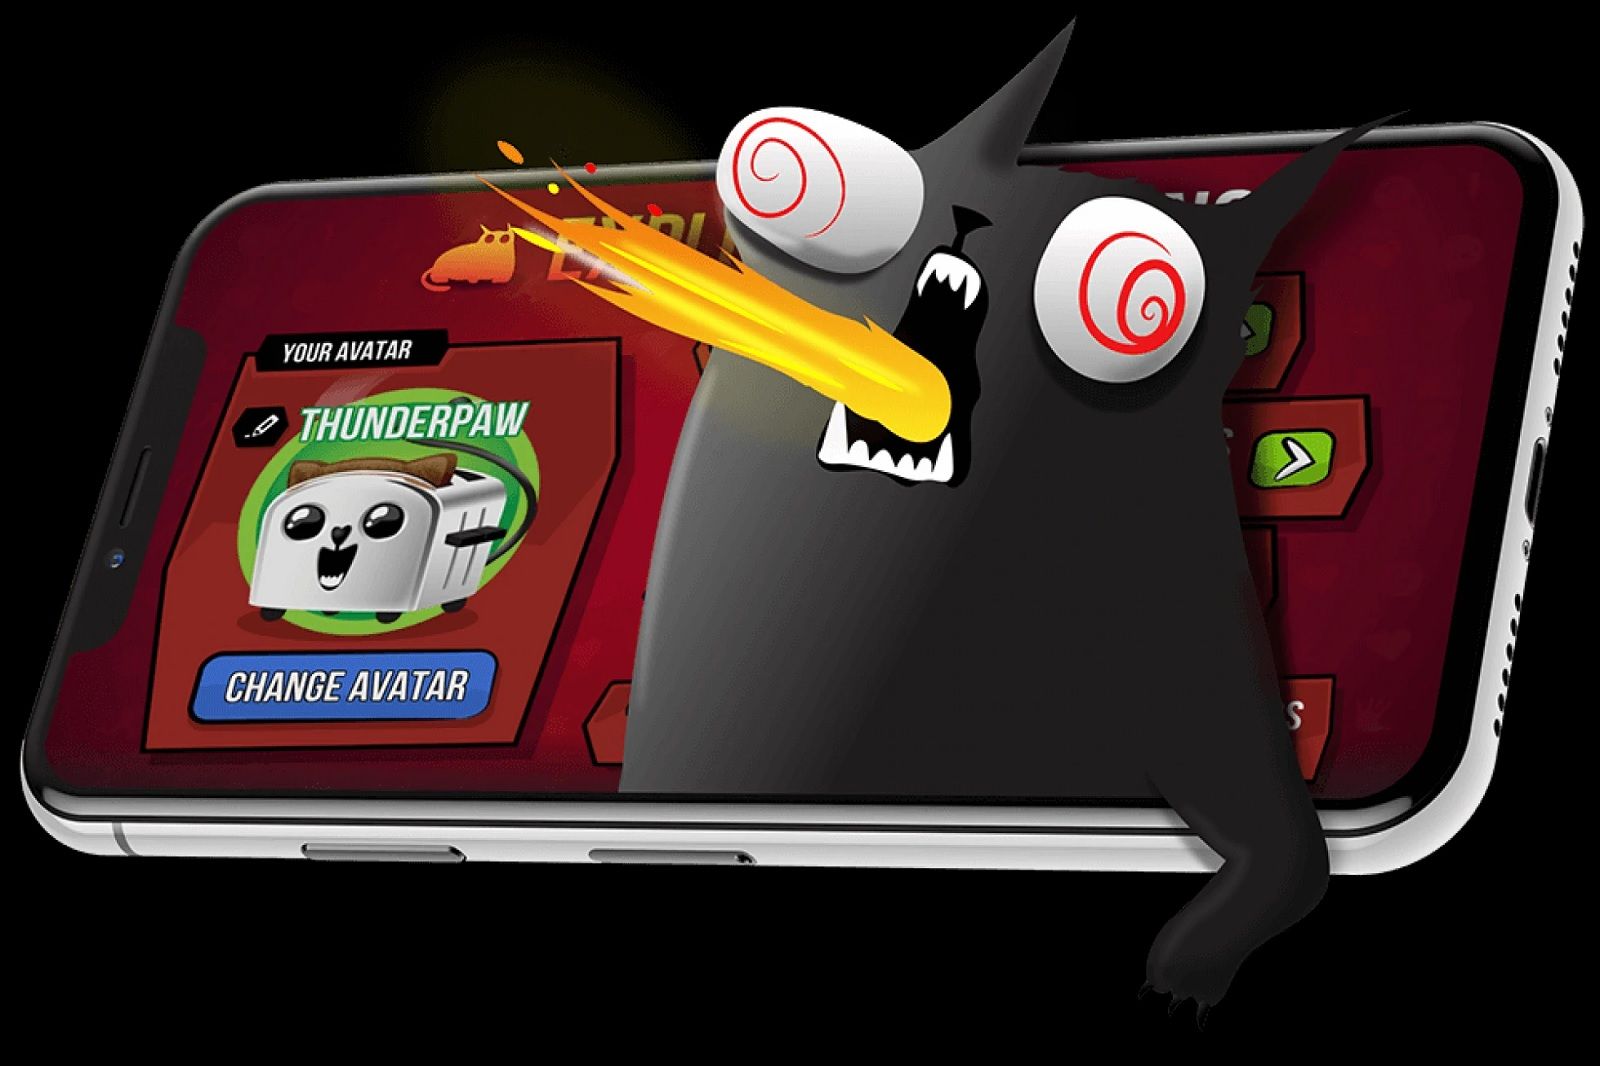 Netflix Announces 'Exploding Kittens' Mobile Game and Animated